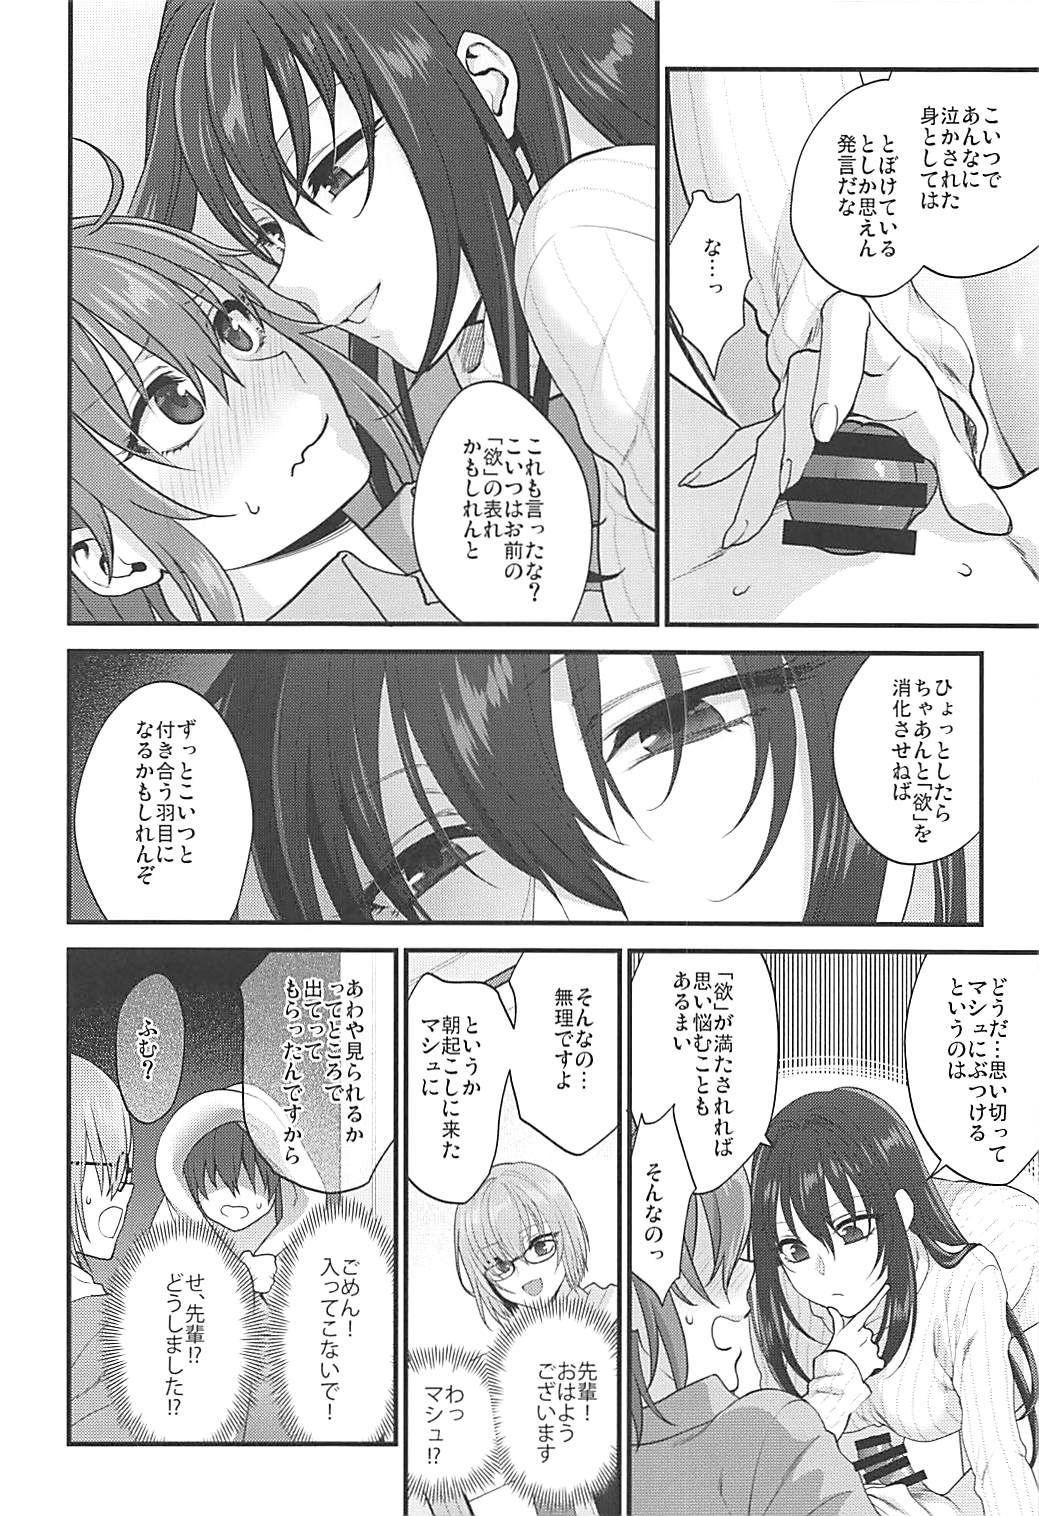 Jerking Off In my room. - Fate grand order Gayemo - Page 7